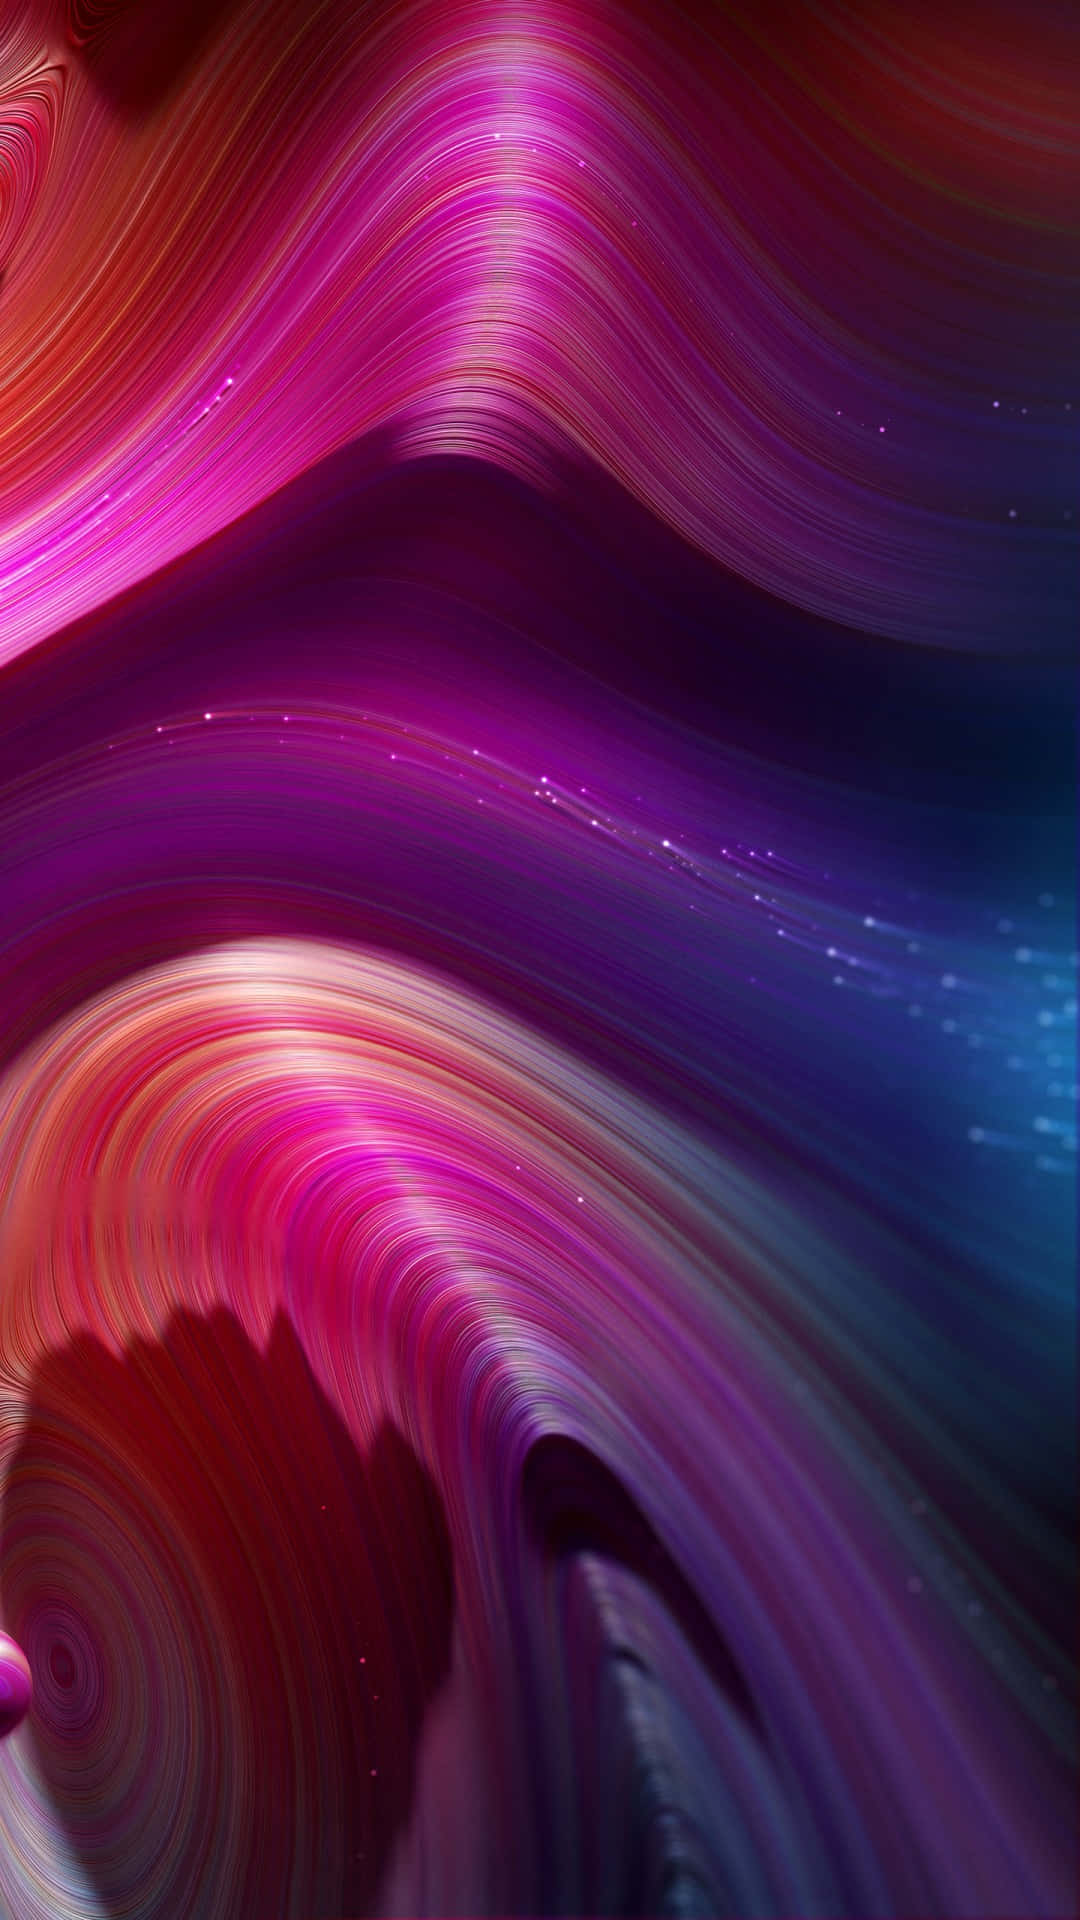 A Colorful Abstract Background With A Swirling Pattern